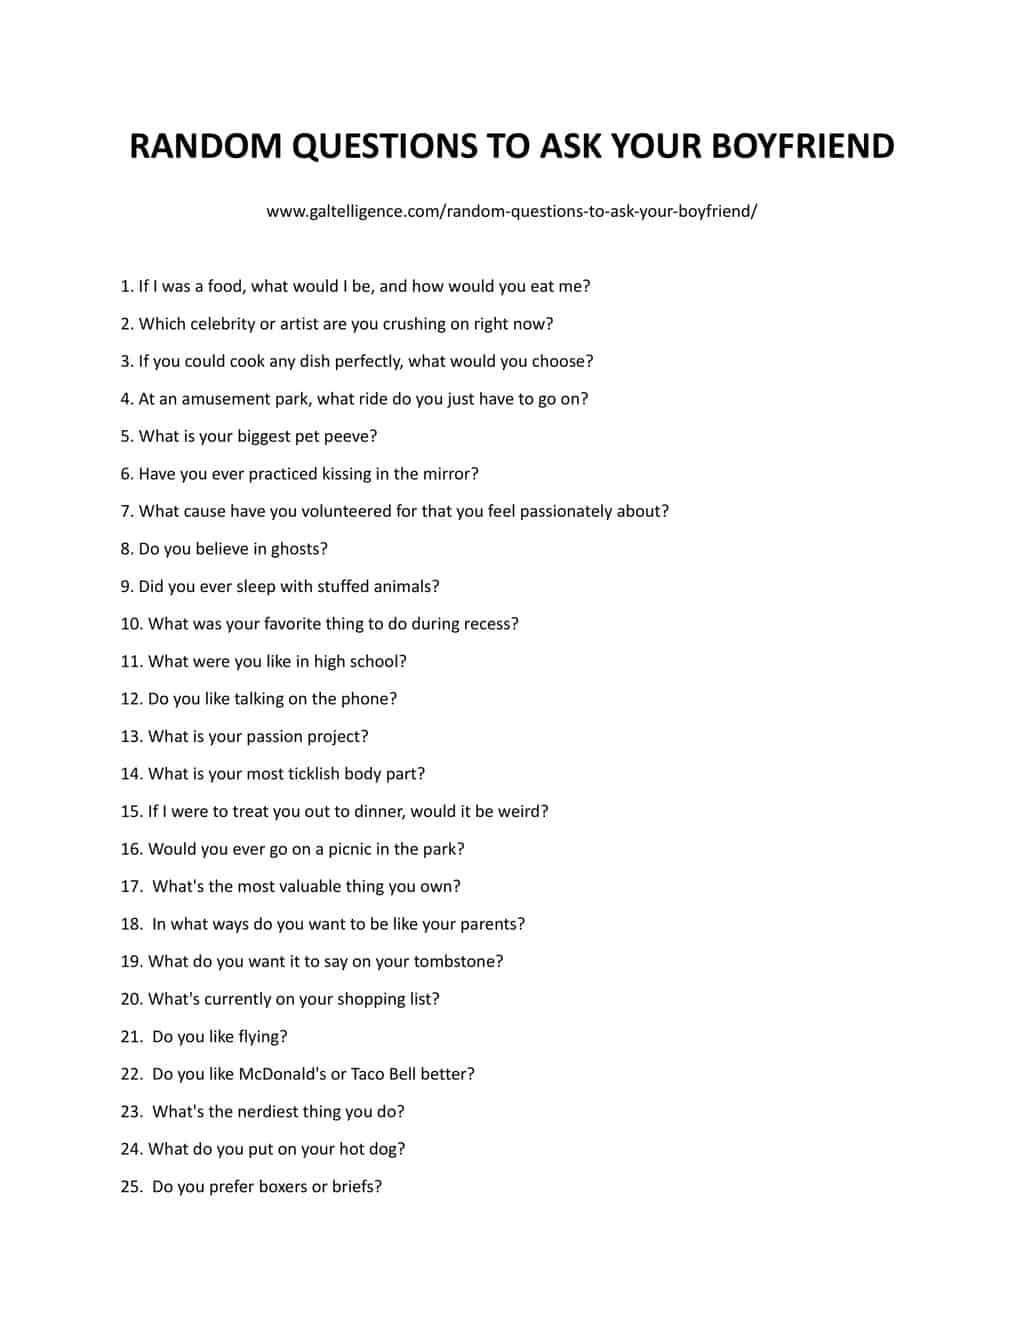 Downloadable and printable list of questions